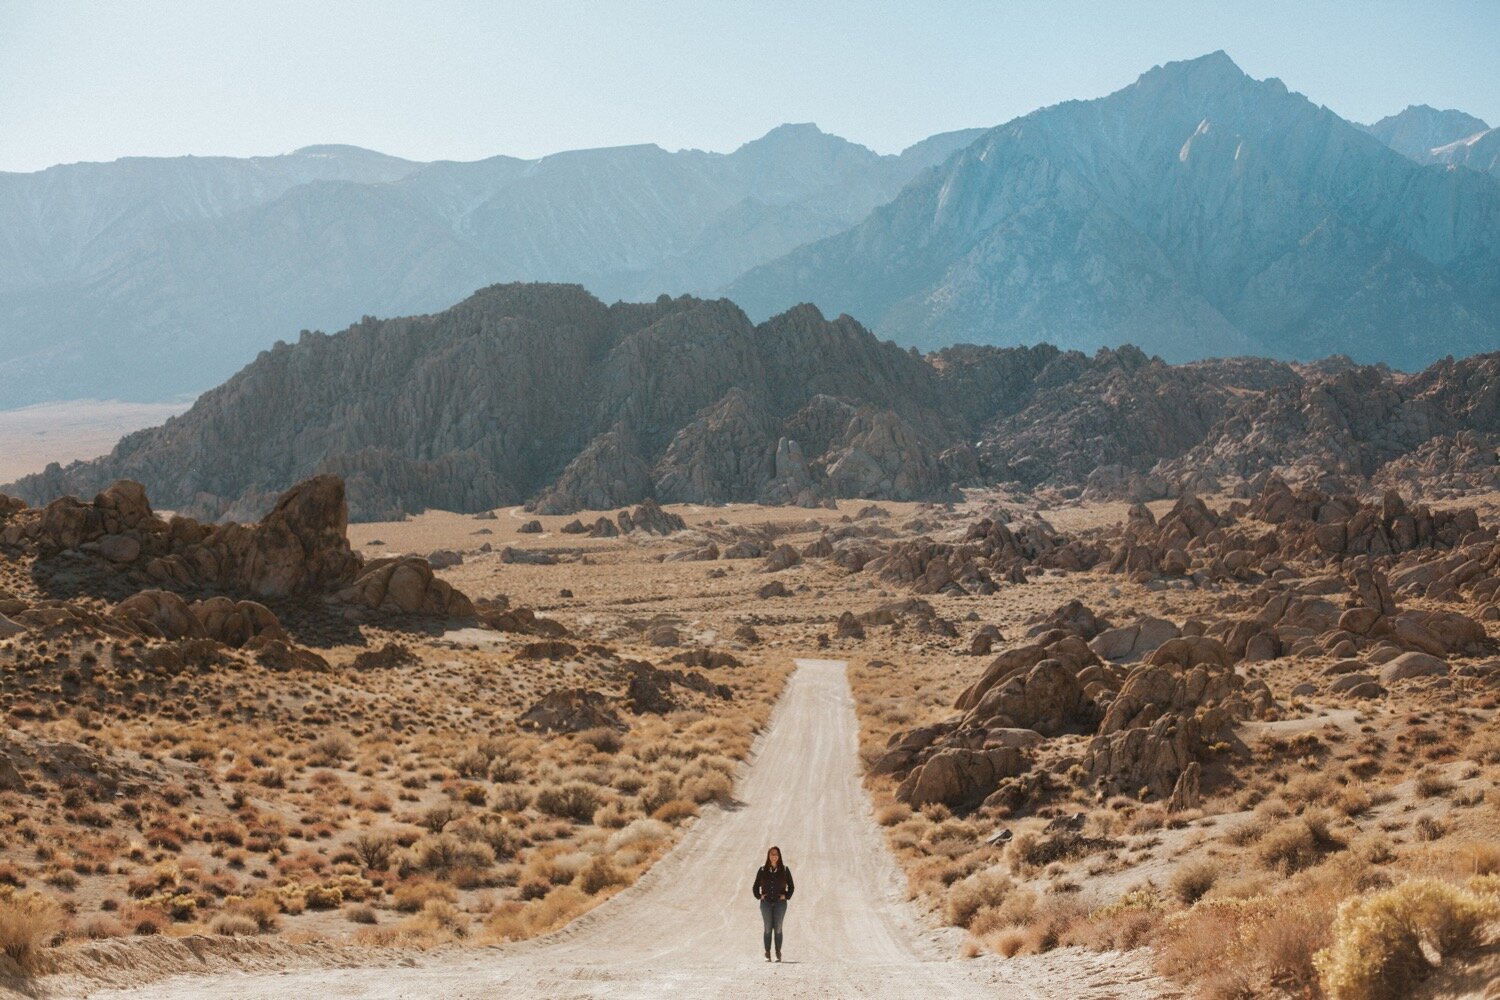  movie road in alabama hills recreation area provides the perfect scene for an elopement or couple adventure photoshoot. image captured by california adventure photographers poppy and vine 